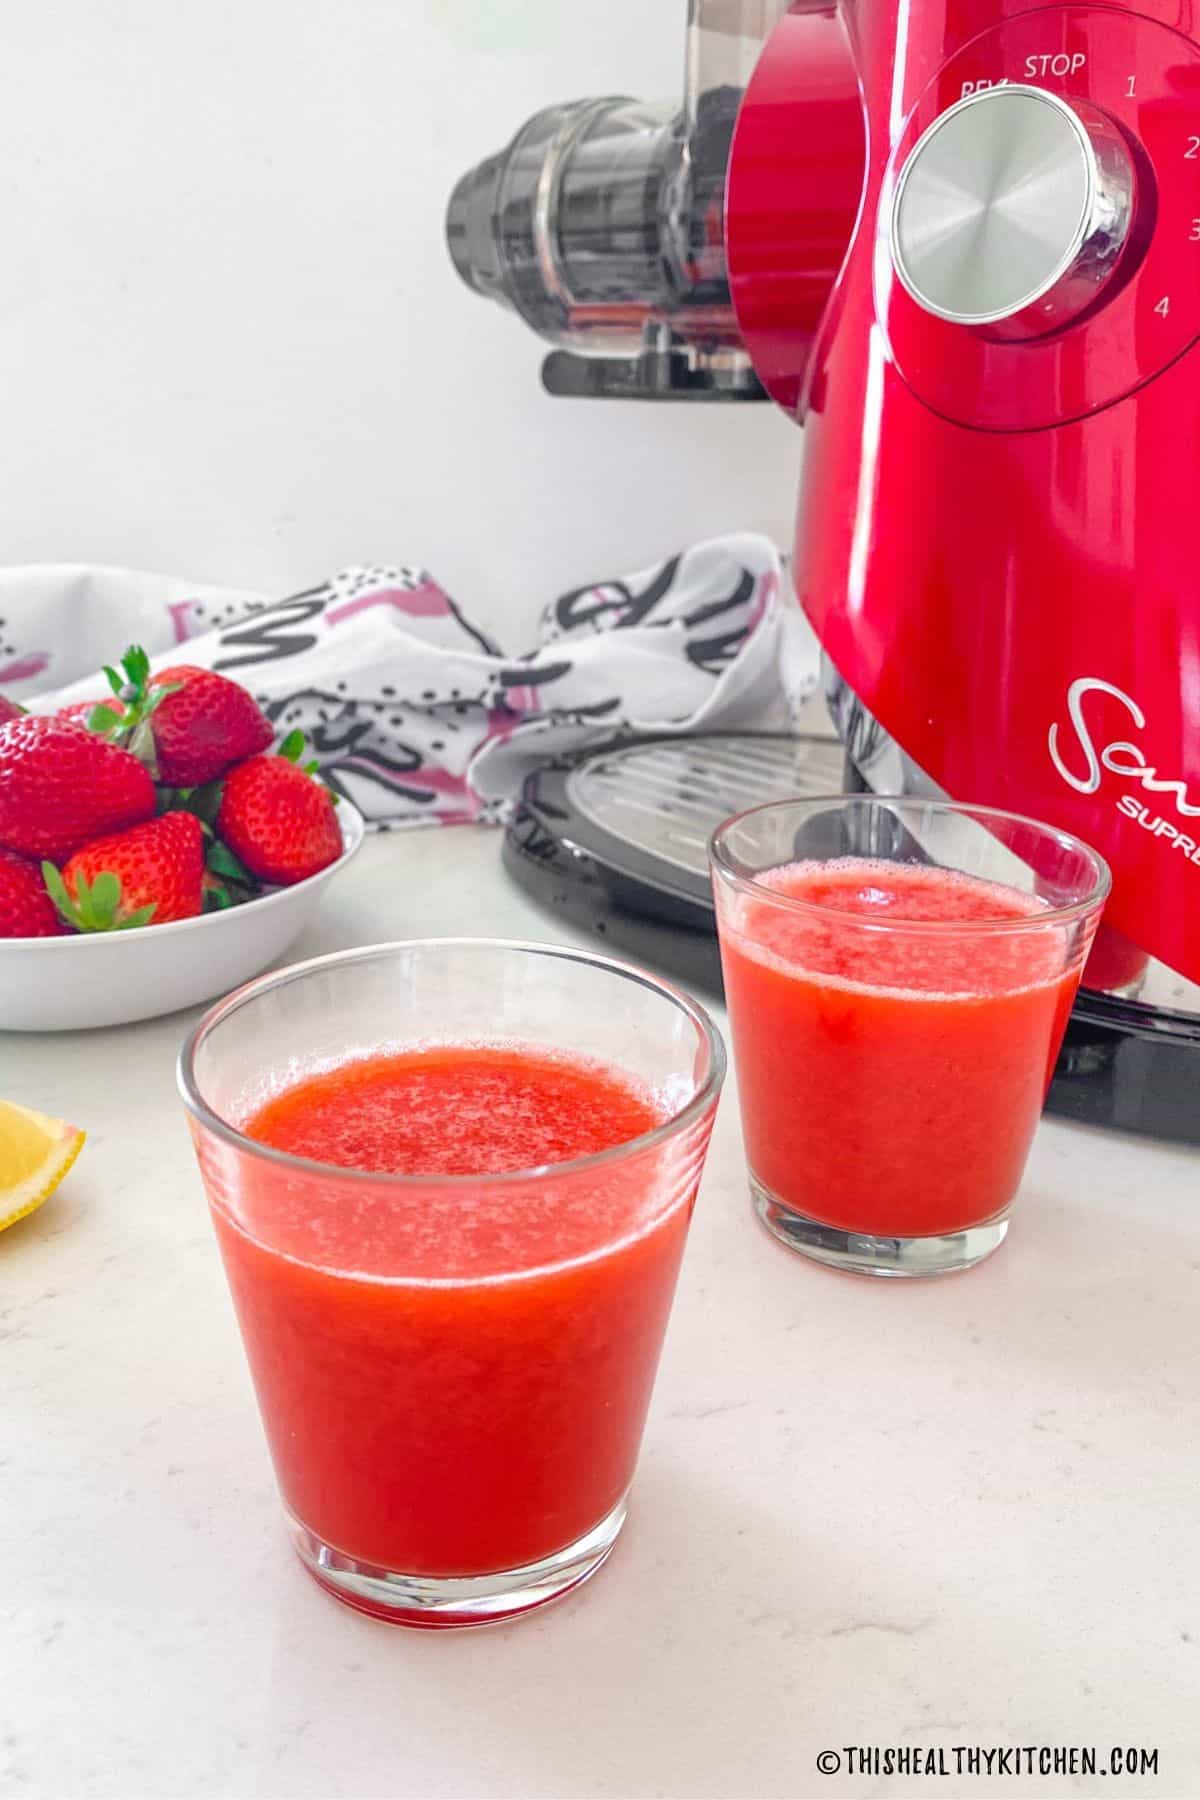 Two glasses of strawberry juice with juicer behind them.